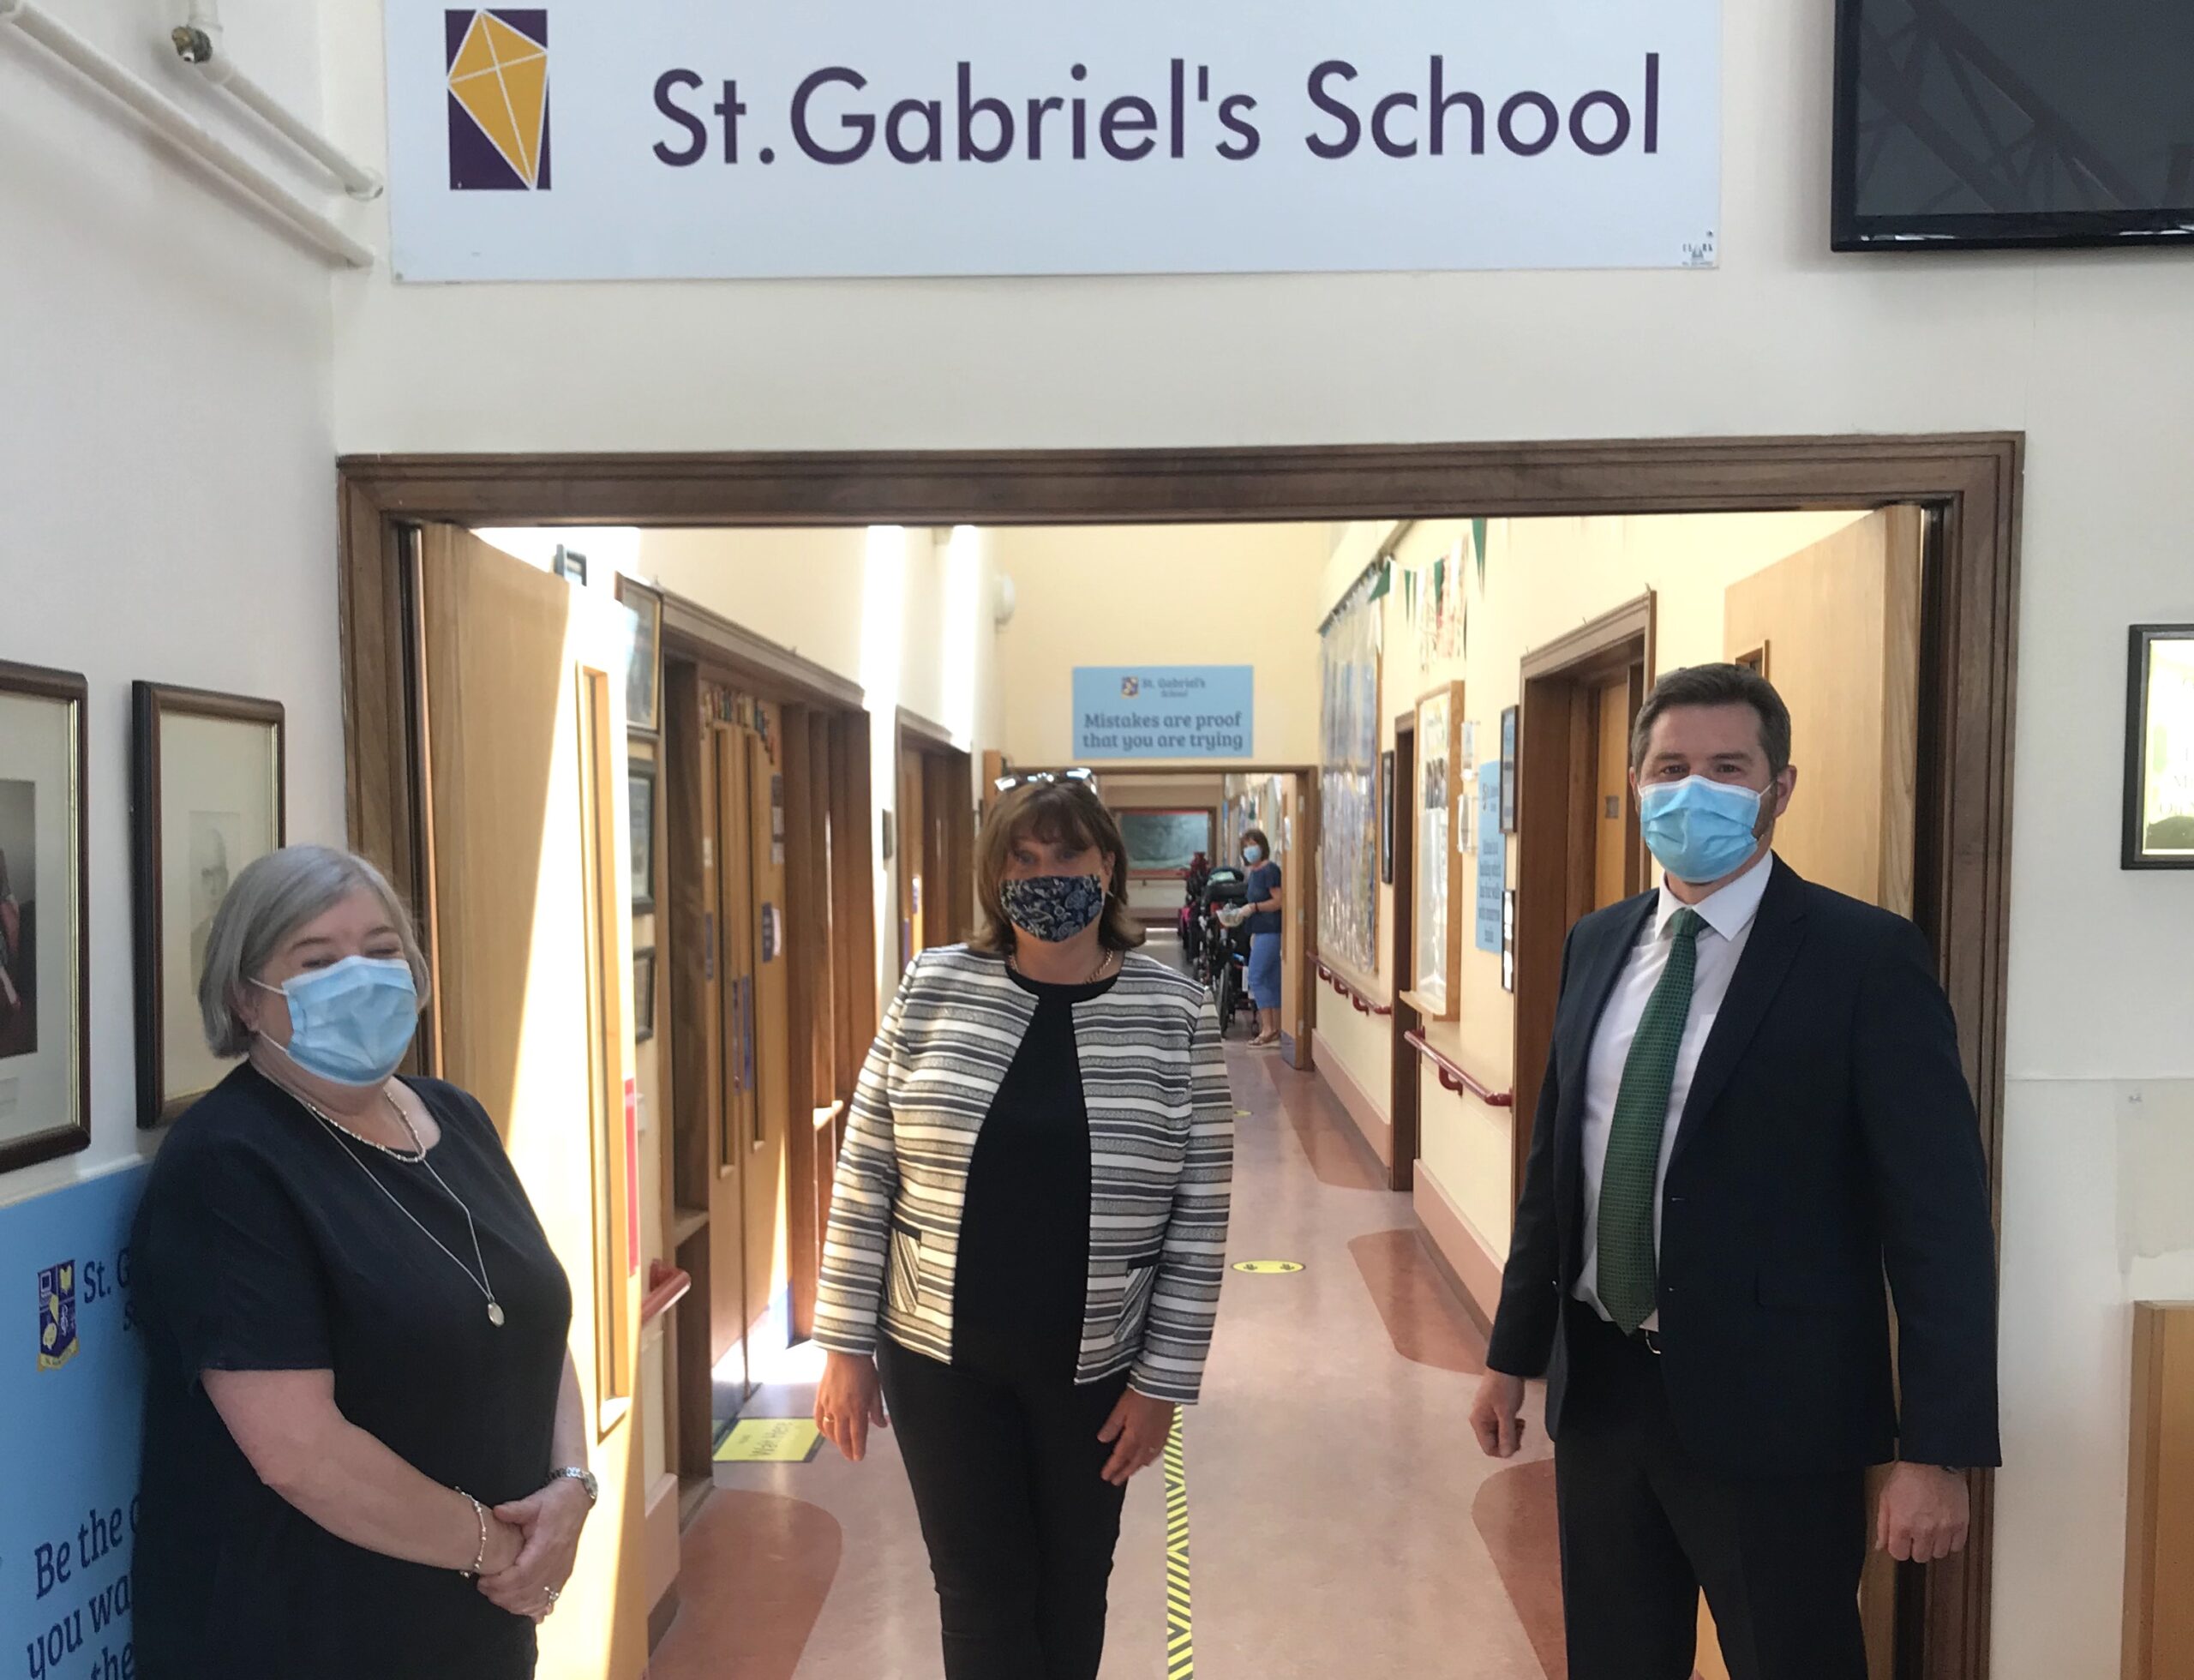 Minister of State Anne Rabbitte received a very warm welcome on her visit to St. Gabriel’s School & Centre and was welcomed by Máire O’ Leary, CEO